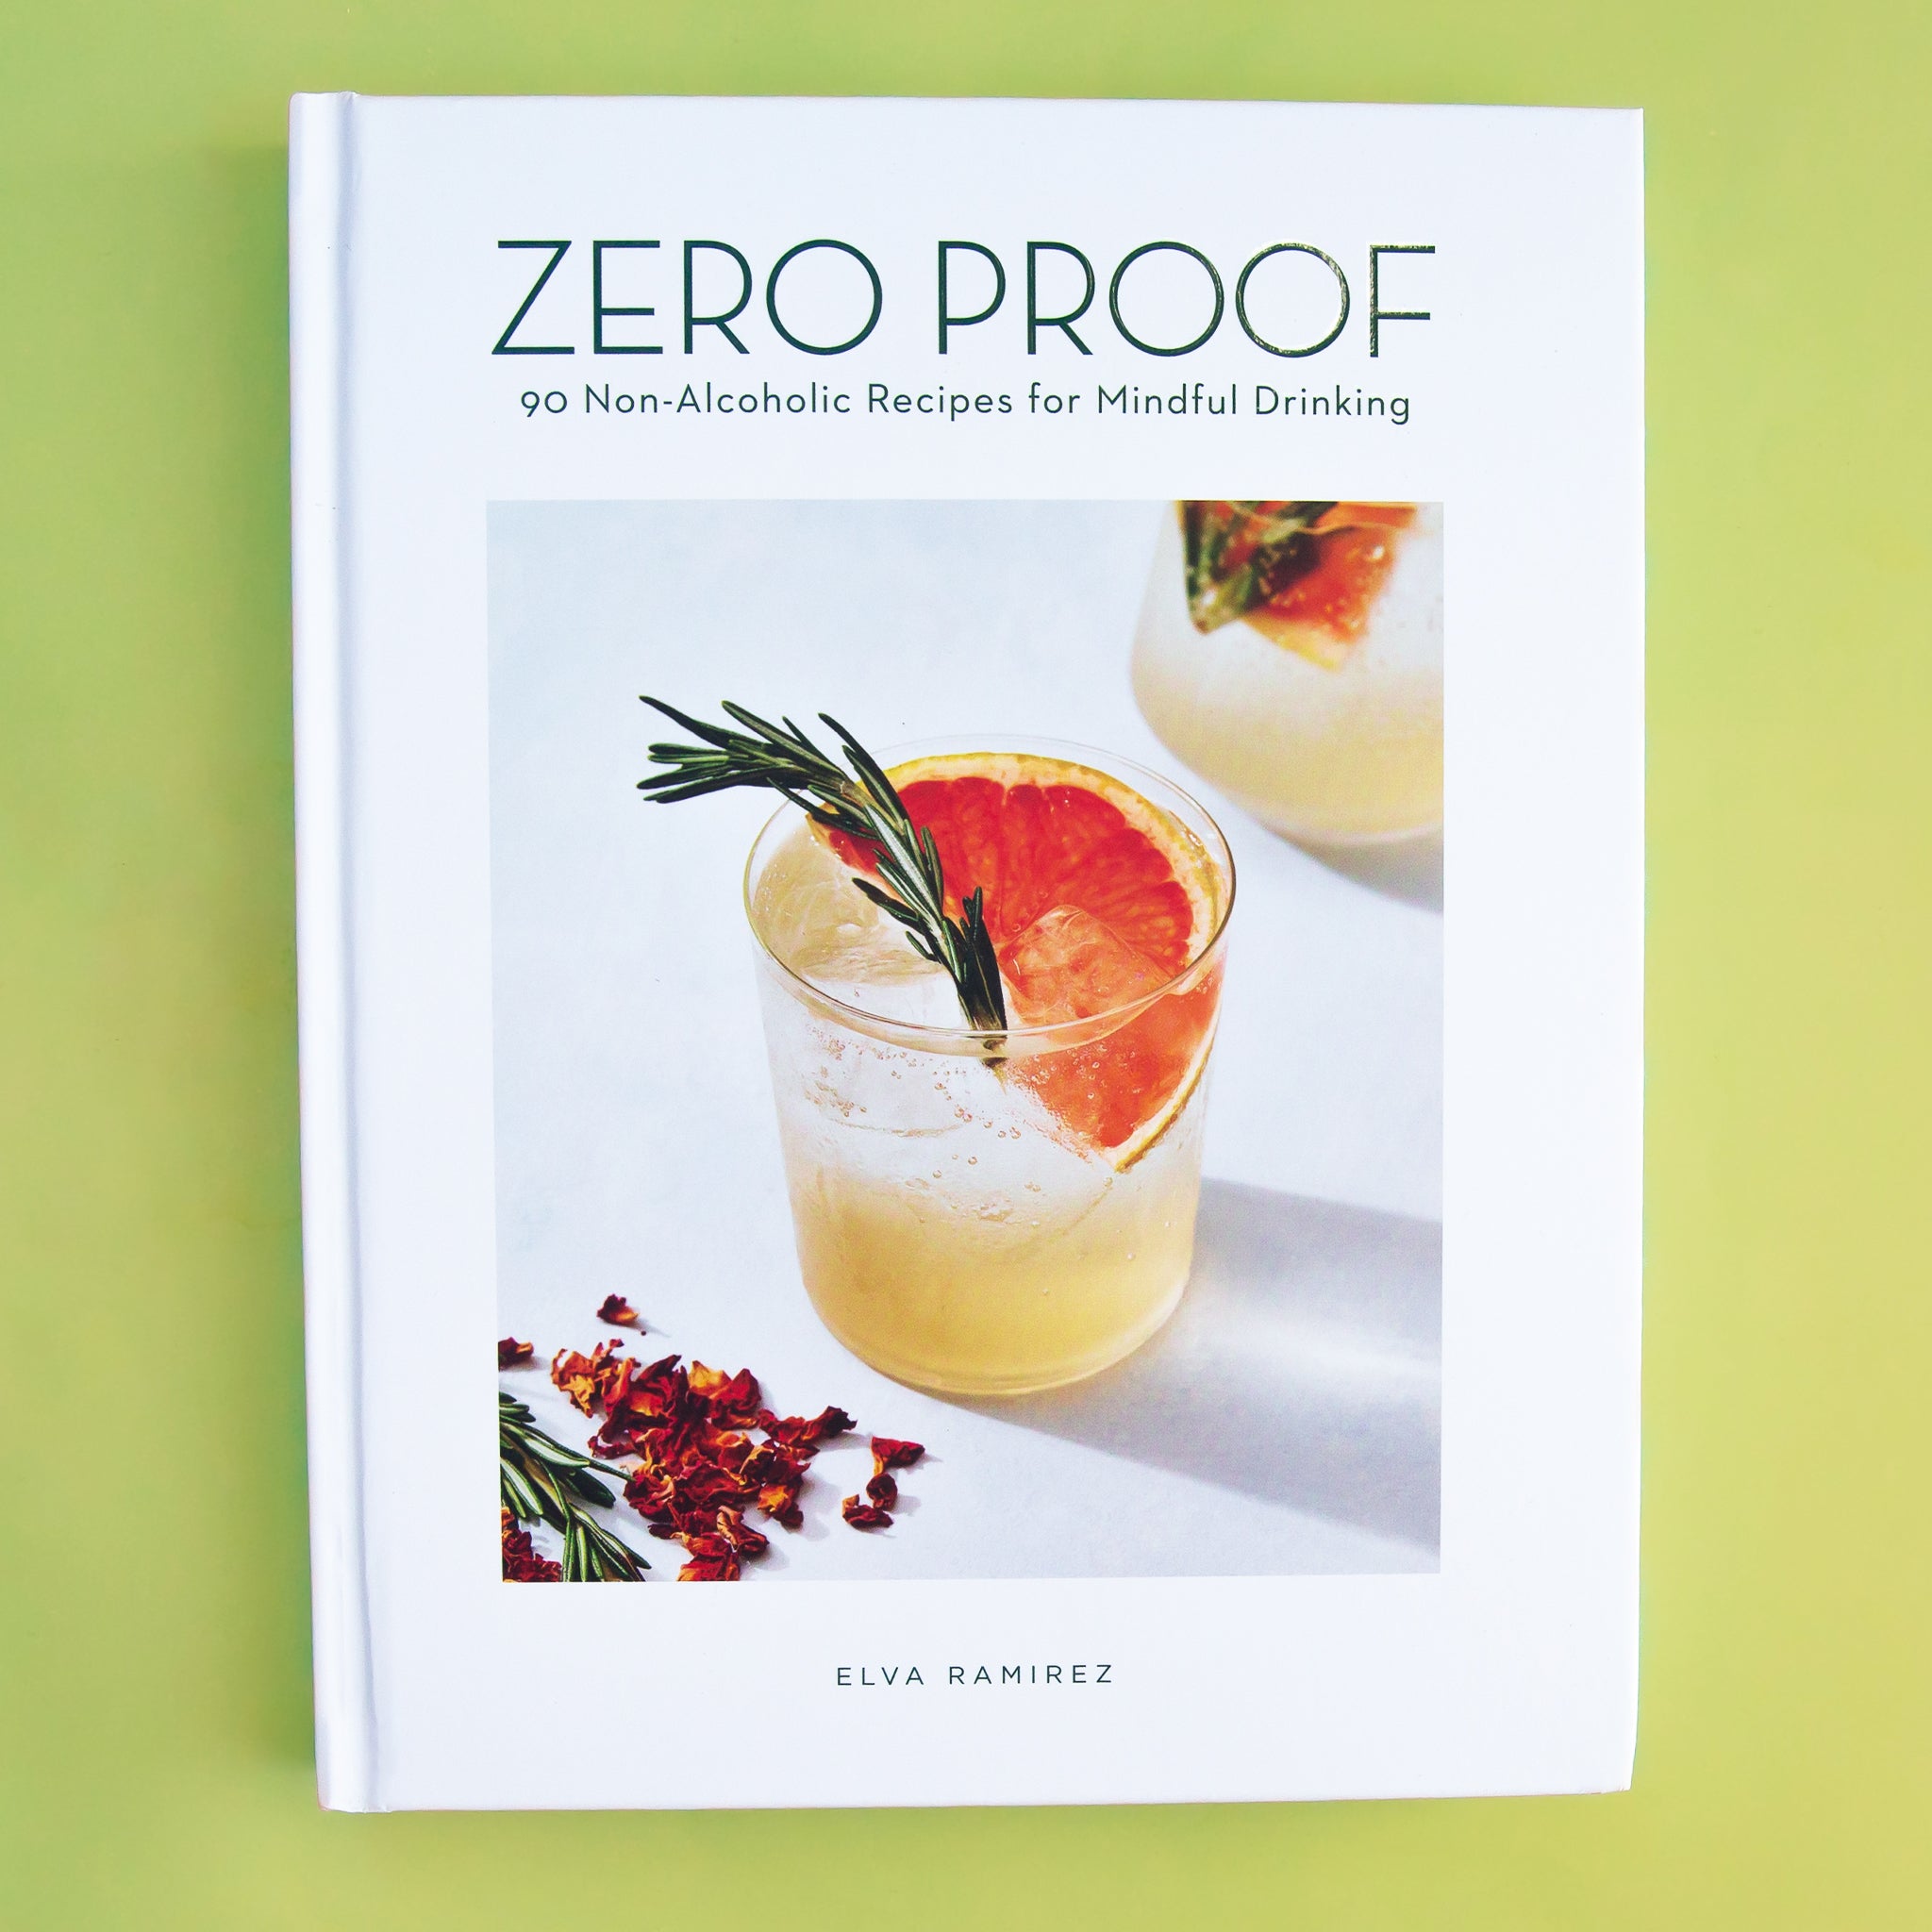 On a green background is a white book with a cocktail photo on the front and the title at the top that reads, "Zero Proof 90 Non-Alcoholic Recipes for Mindful Drinking". 